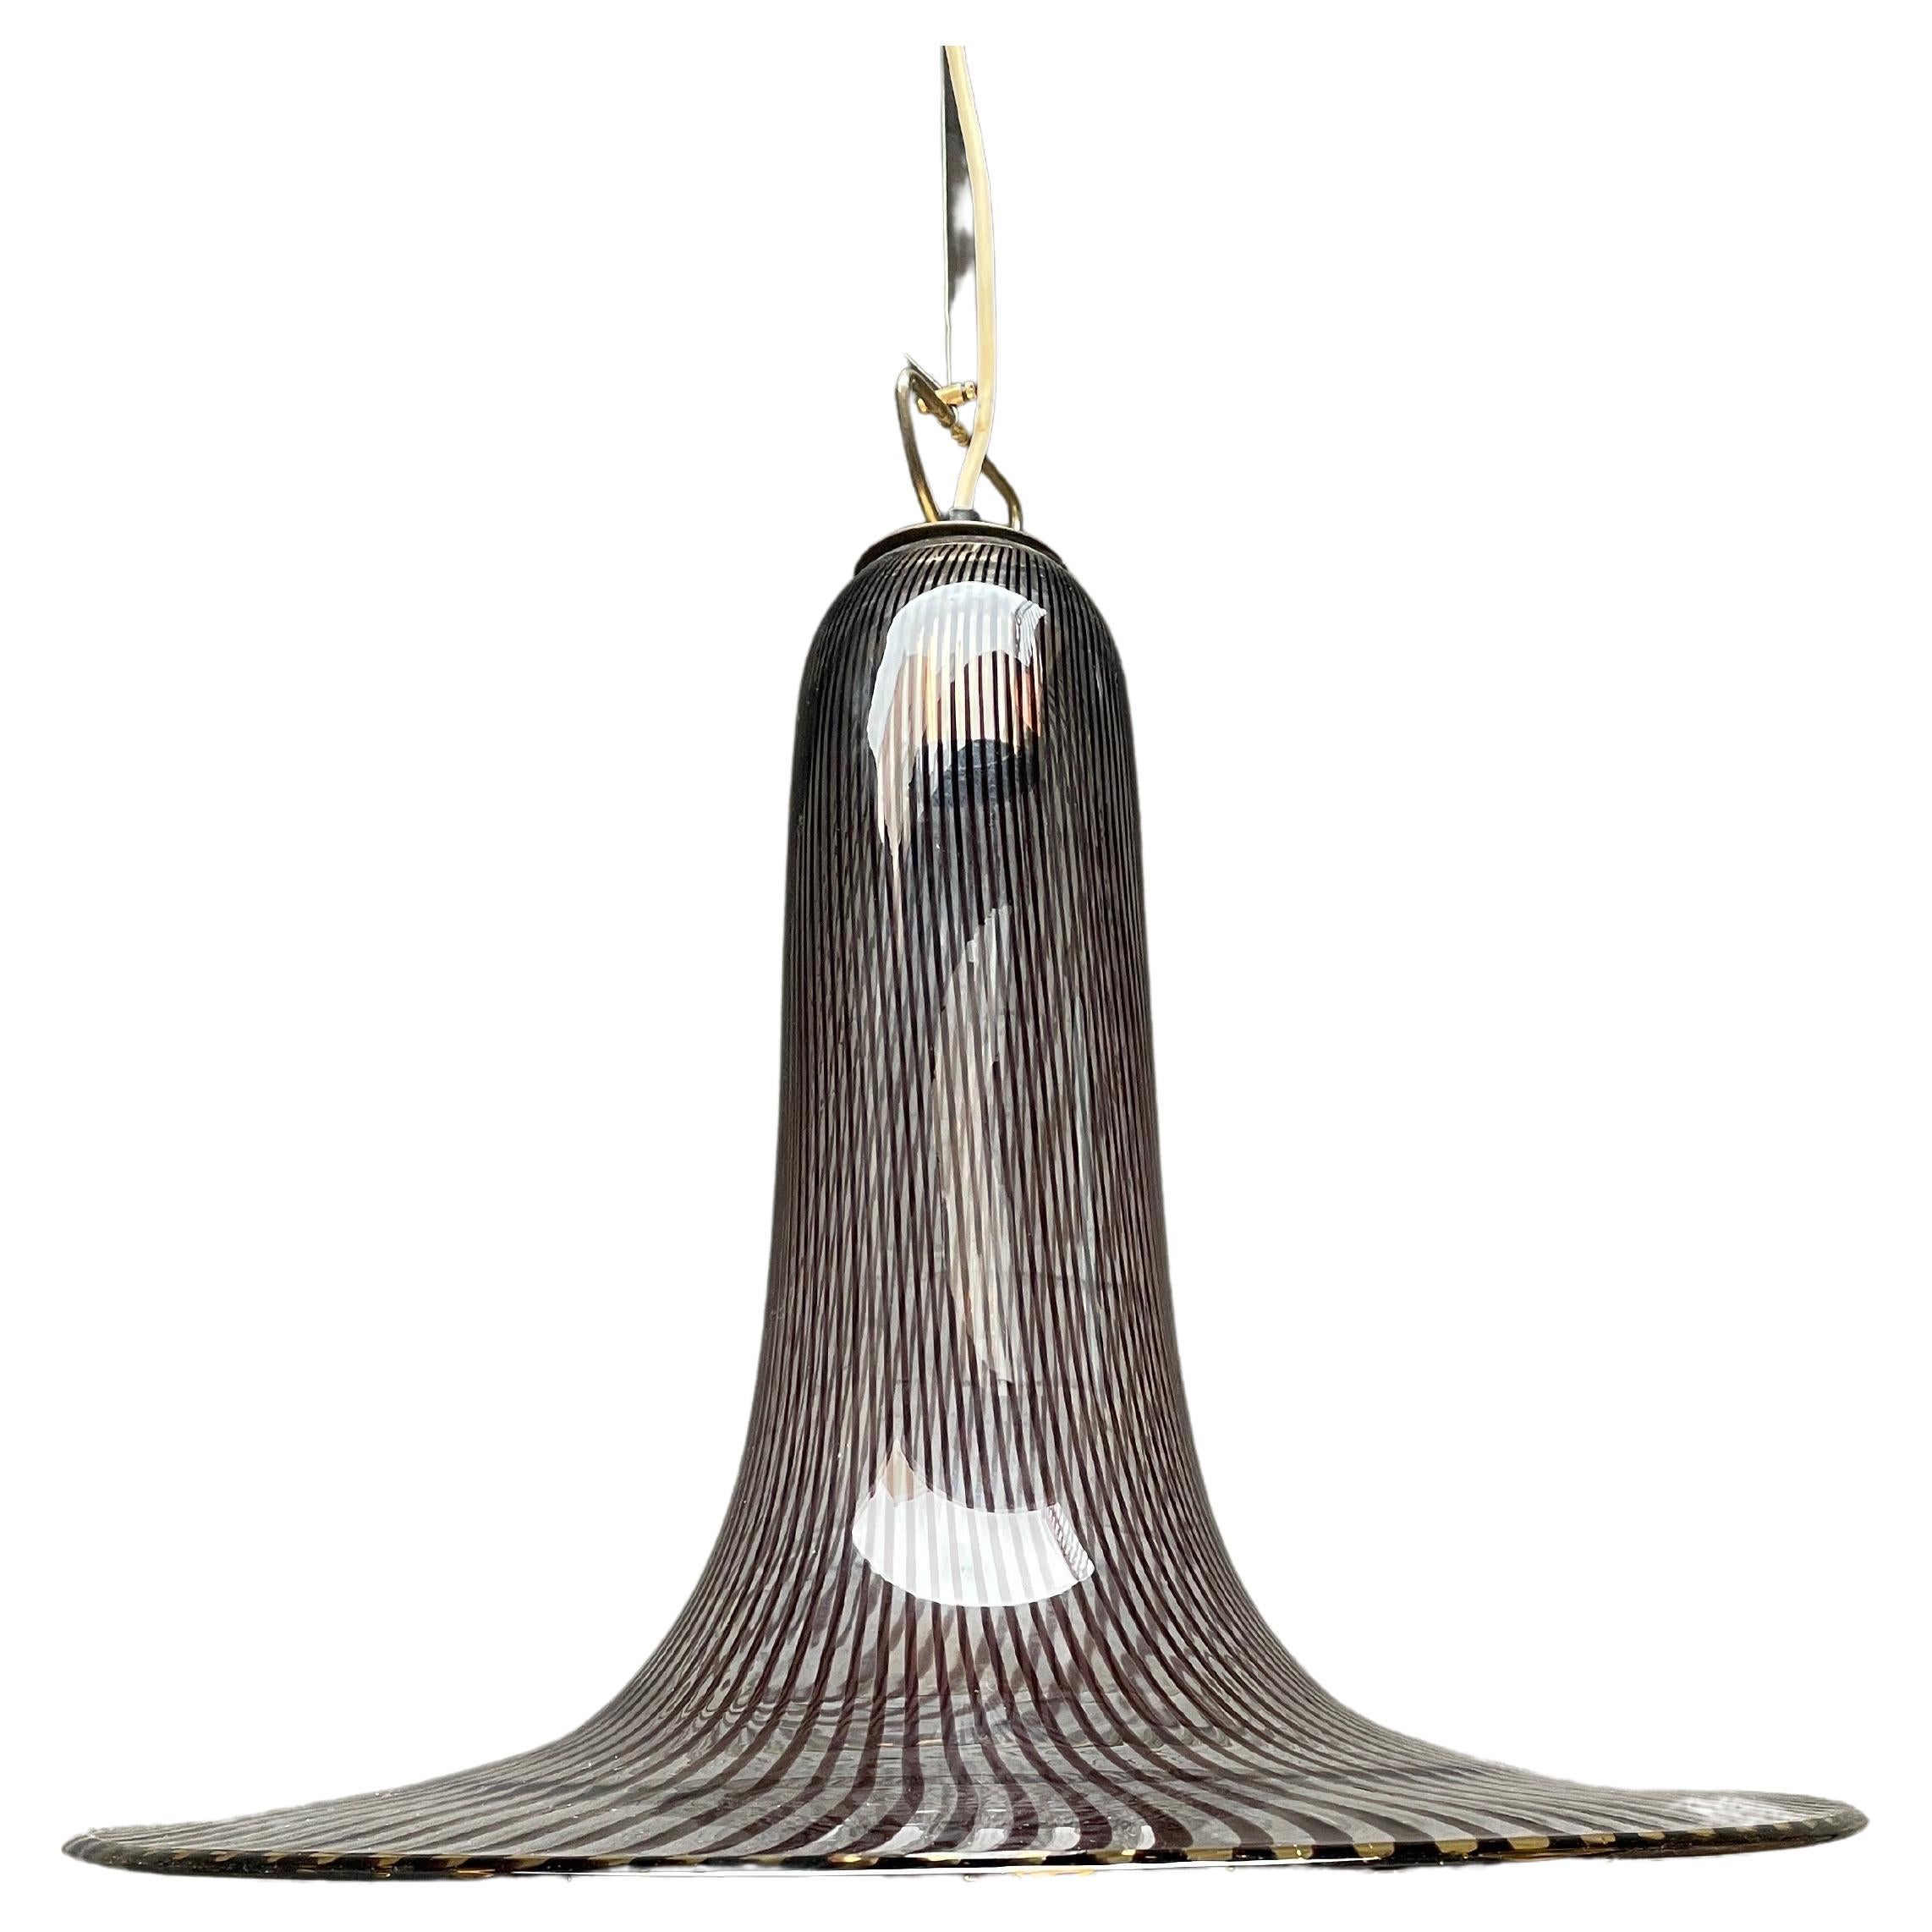 A large trumpet shaped Murano pendant in clear and purple striped crystal with brass accents. The drop can be altered by the wire stem. Designed by Lino Tagliapietra for Venini.

Can be re wired for any countries code